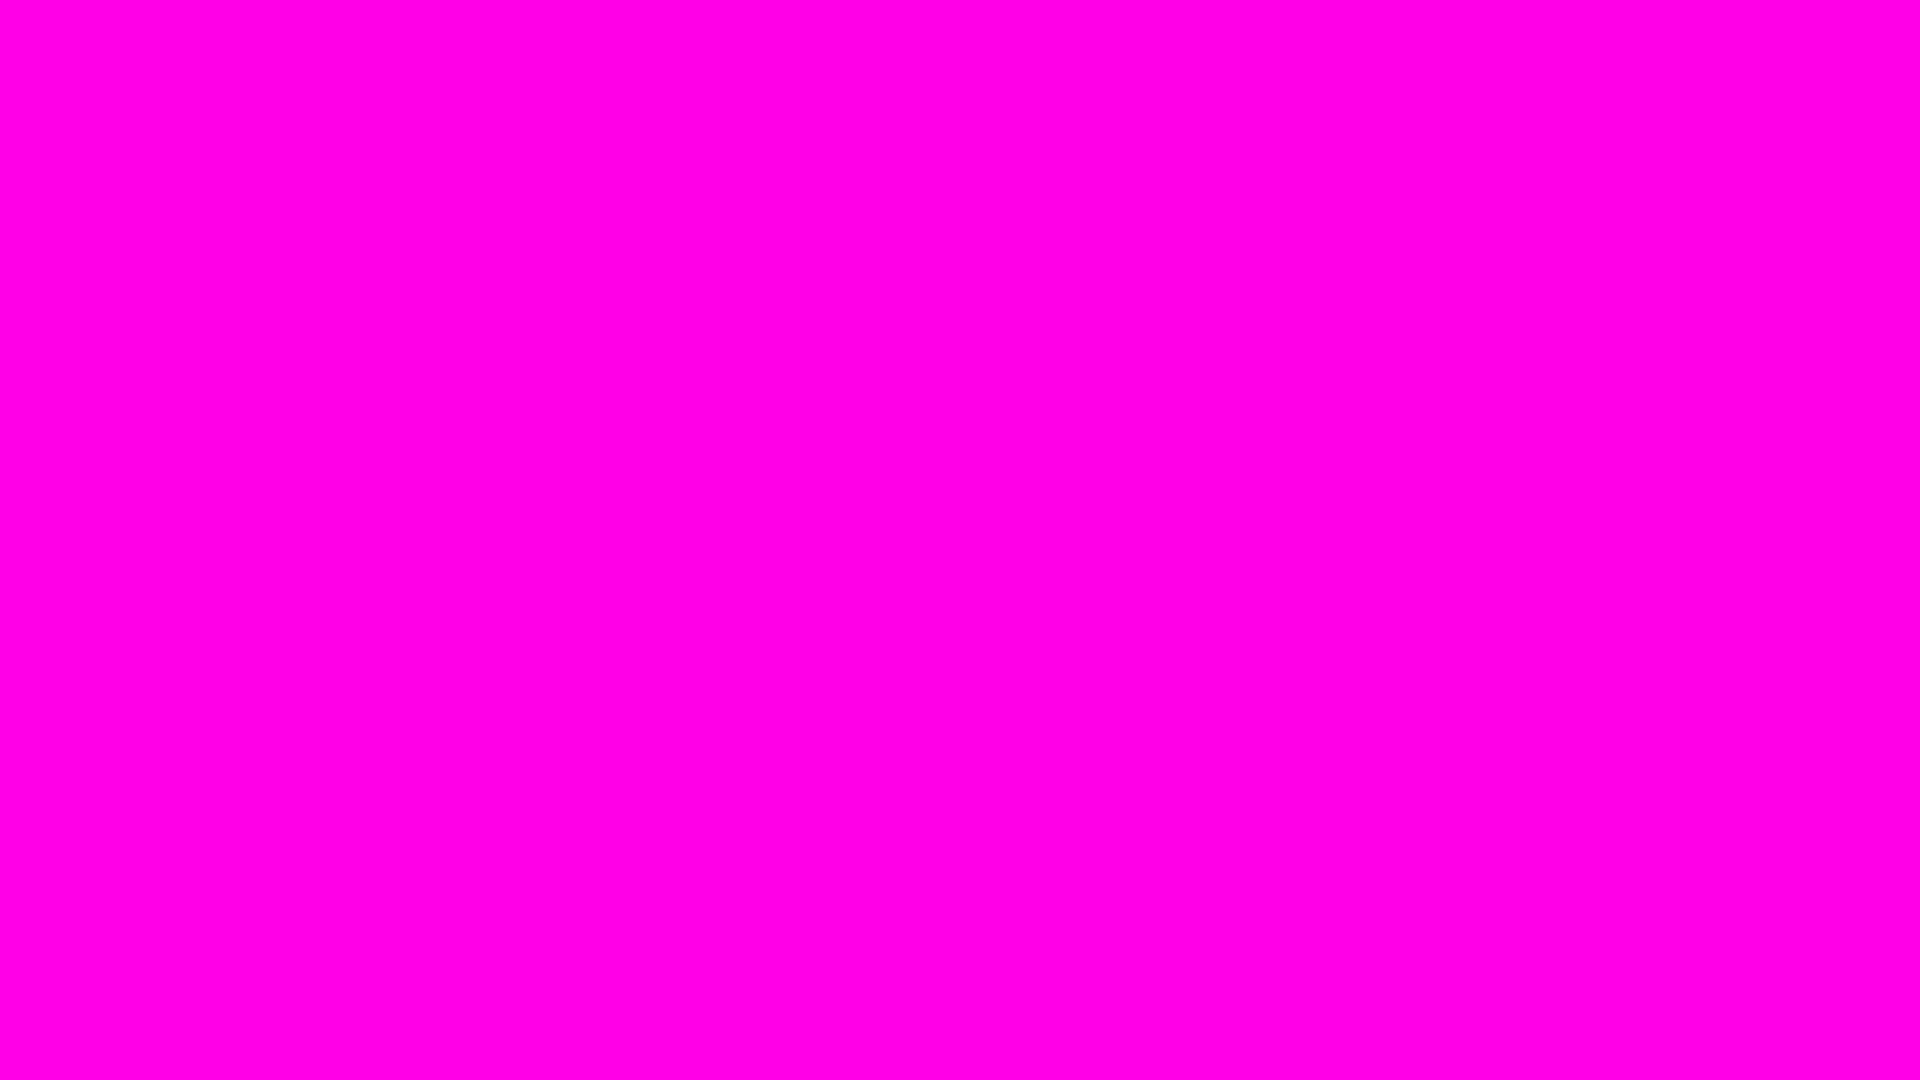 Hot Pink In Plain Light Shade Background